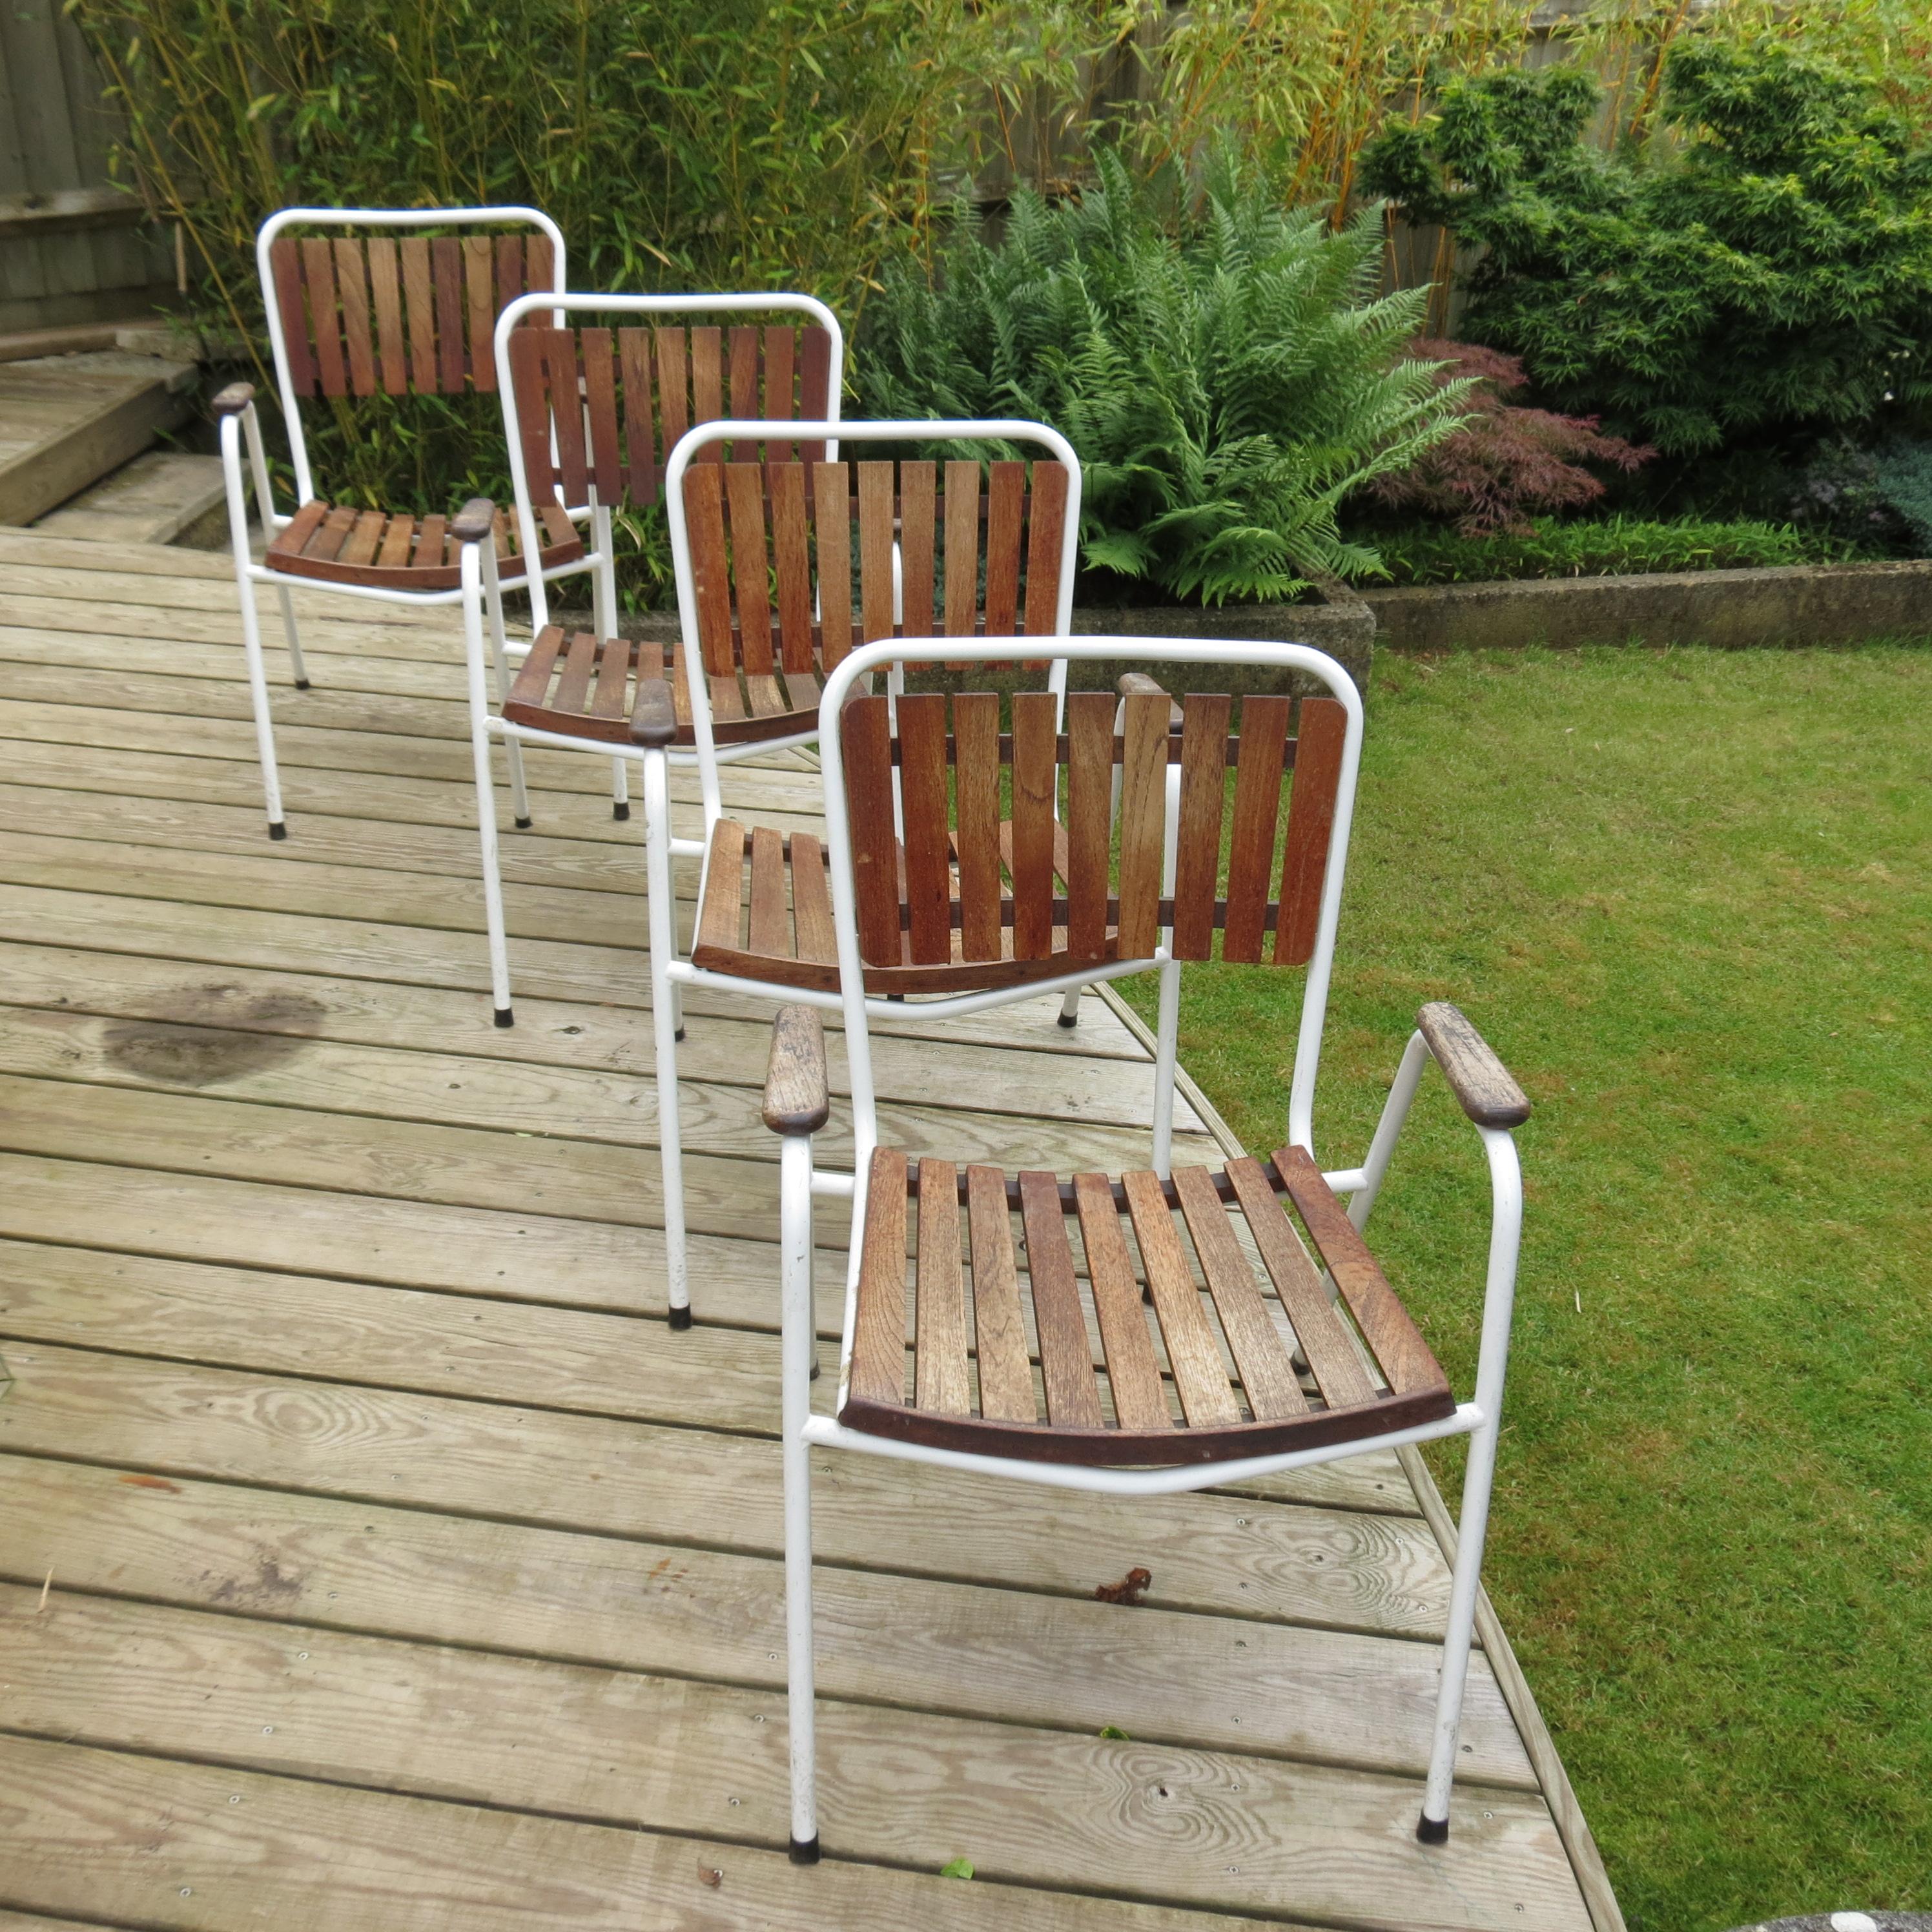 Set of 4 garden chairs by Daneline, Denmark.  Made from painted steel tube frames and Teak slatted seat and back rest.  The chairs stack for ease of storage.
In good condition, with only minimal signs of use.

ST1042.